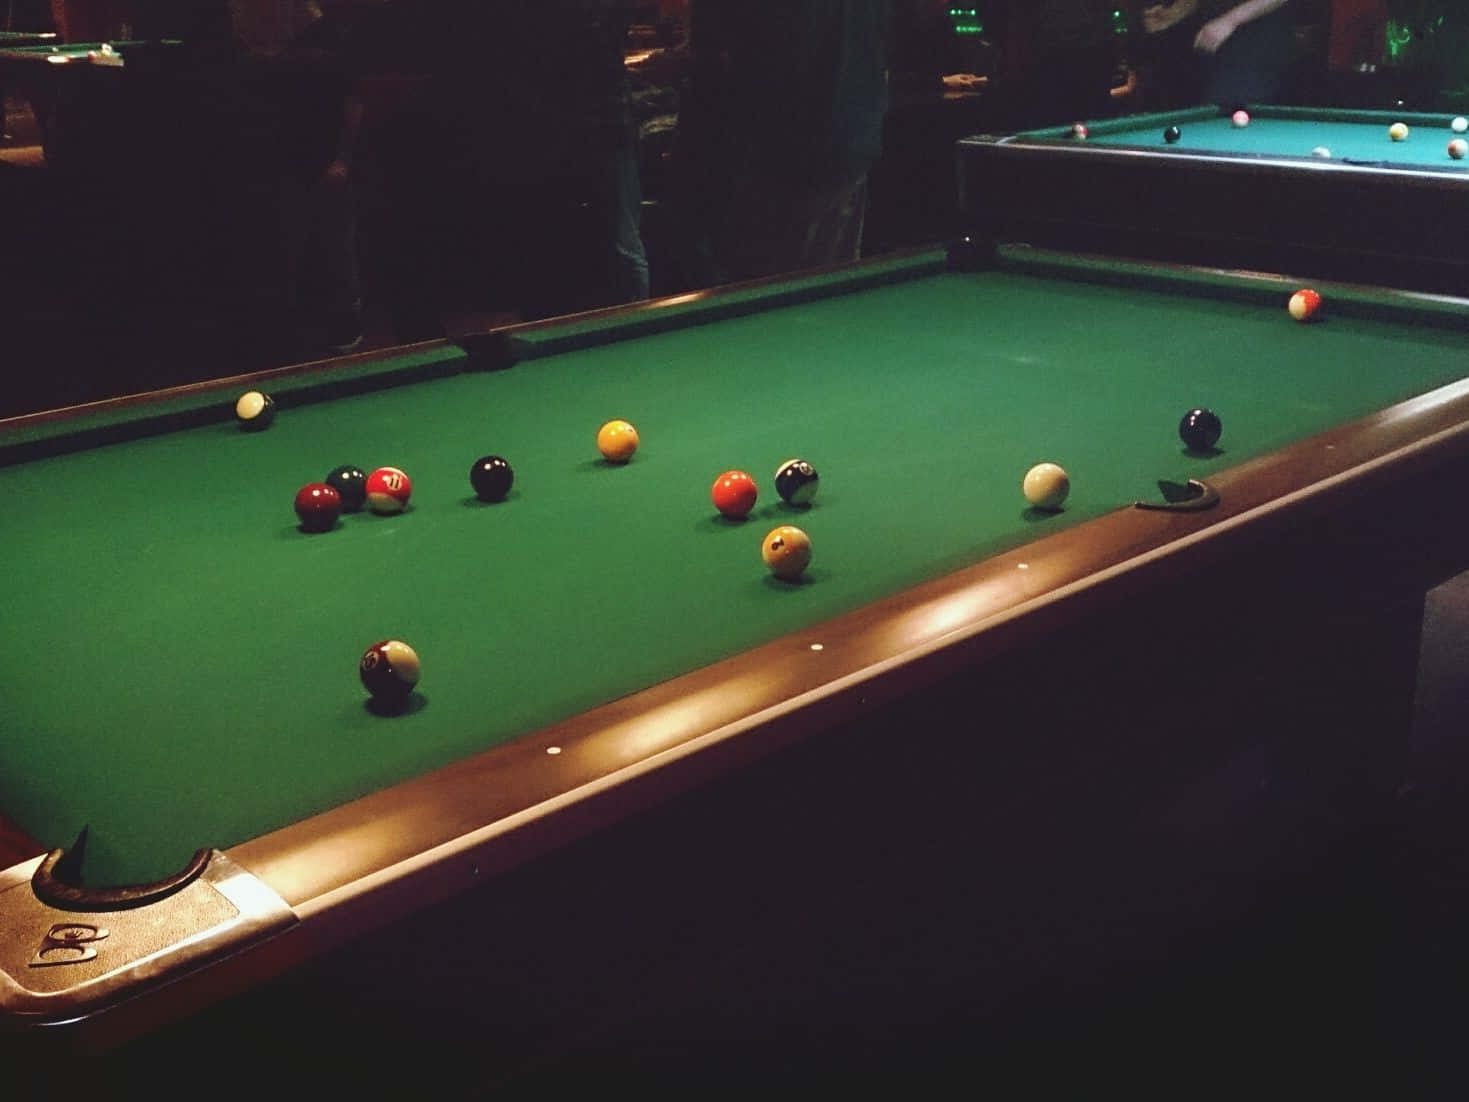 A Pool Table With Balls